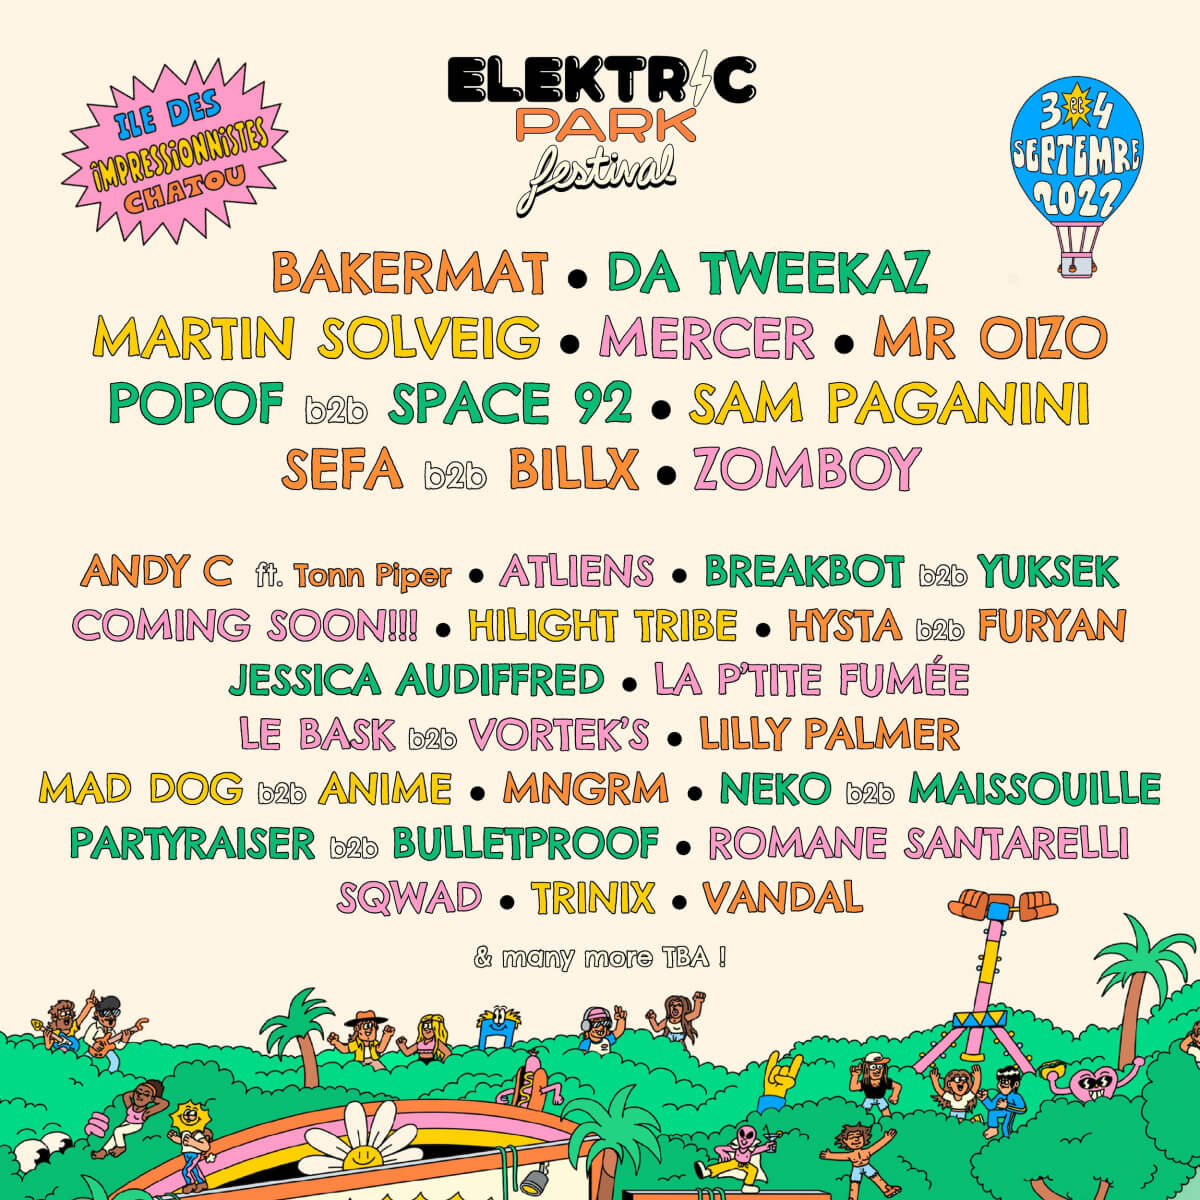 The Elektric Park Festival comes back for its 12th edition